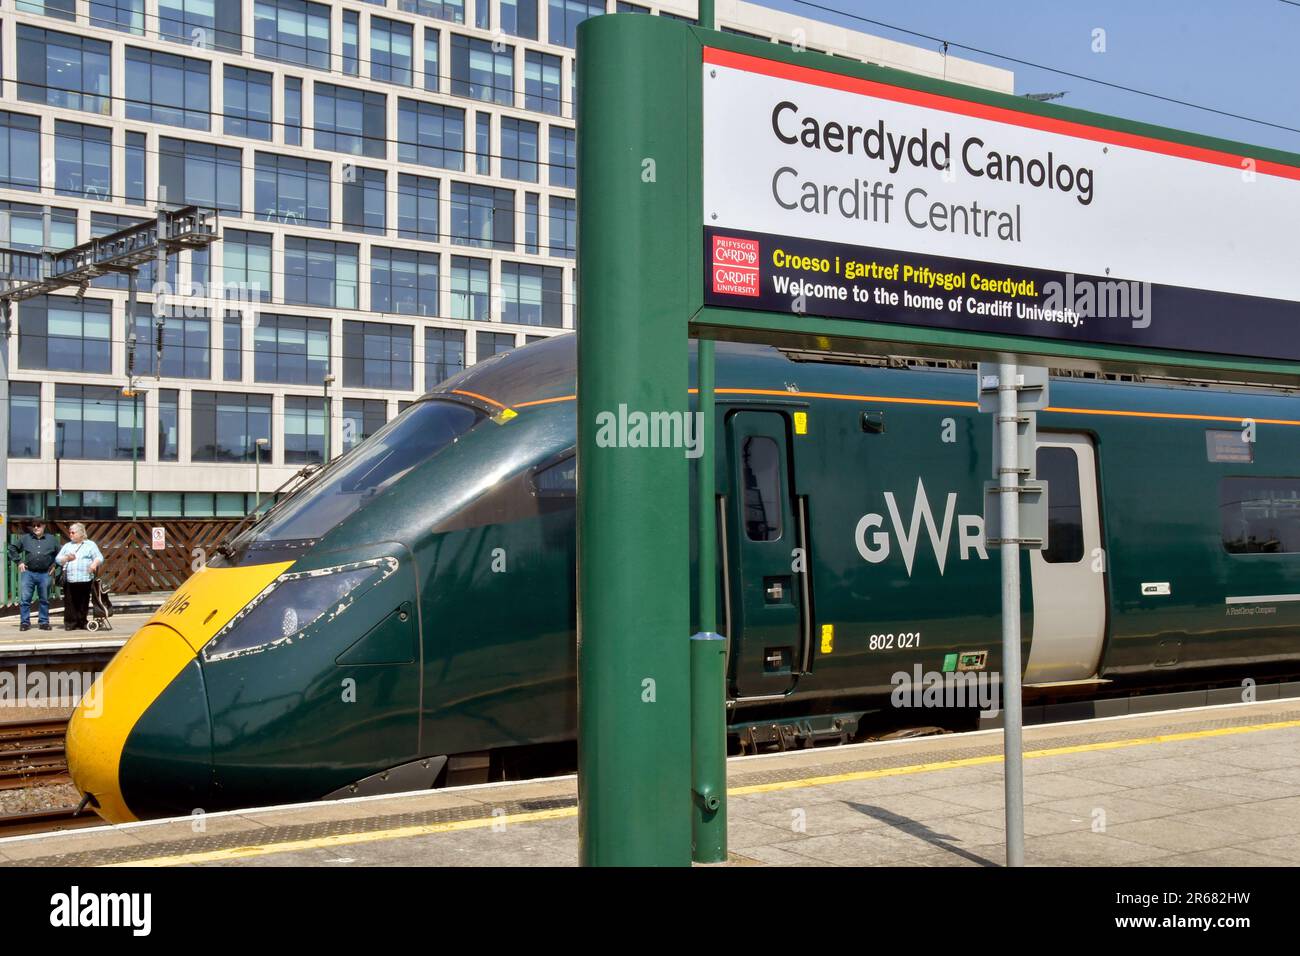 Cardiff, Wales - June 2023: High speed train operated by Great Western Railway alongside a name sign at Cardiff Central railway station Stock Photo